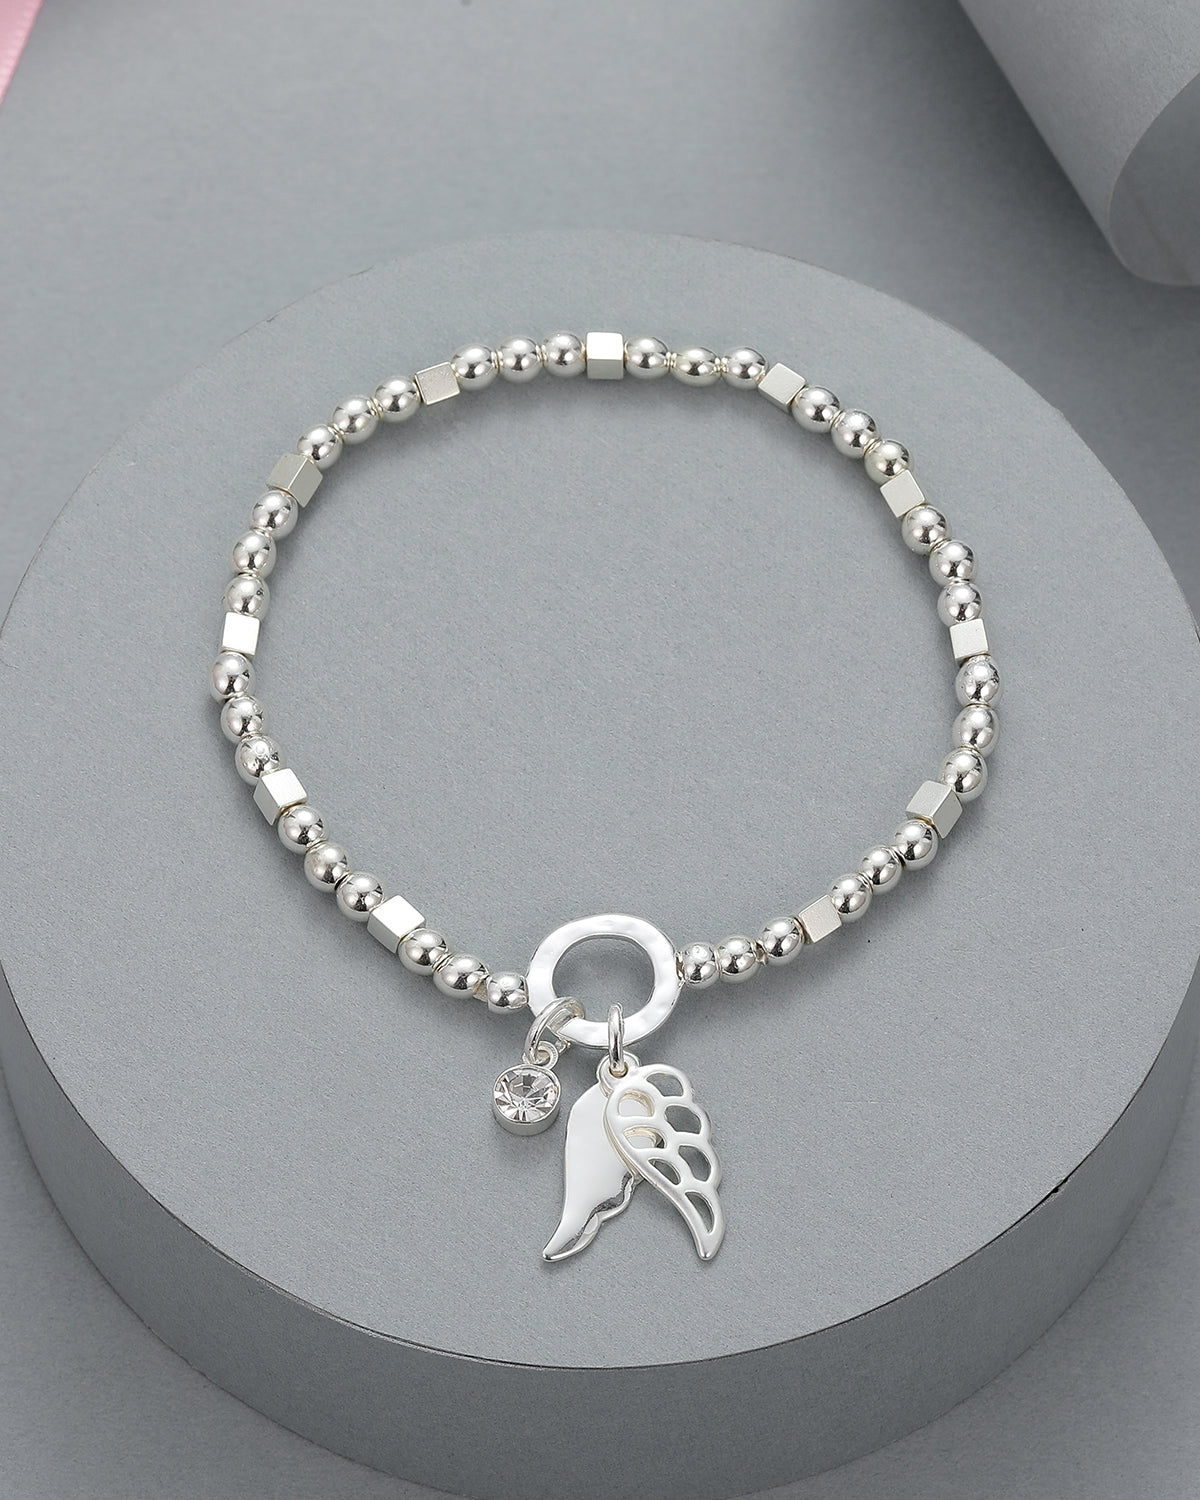 Silver elasticated bracelet with angel wing motif